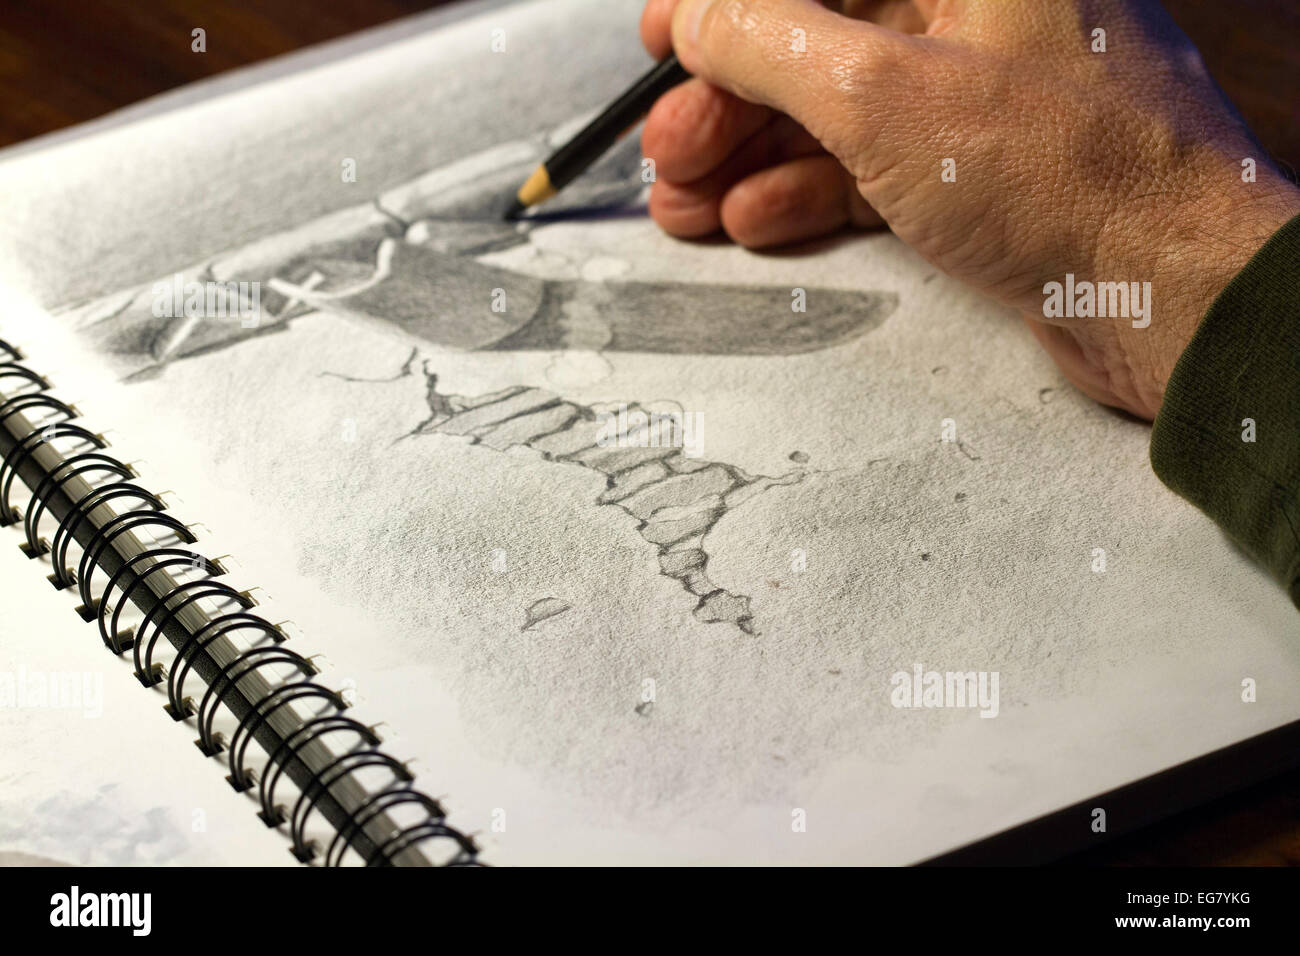 Artist using pencil on paper to draw a picture using lines and shading. Stock Photo